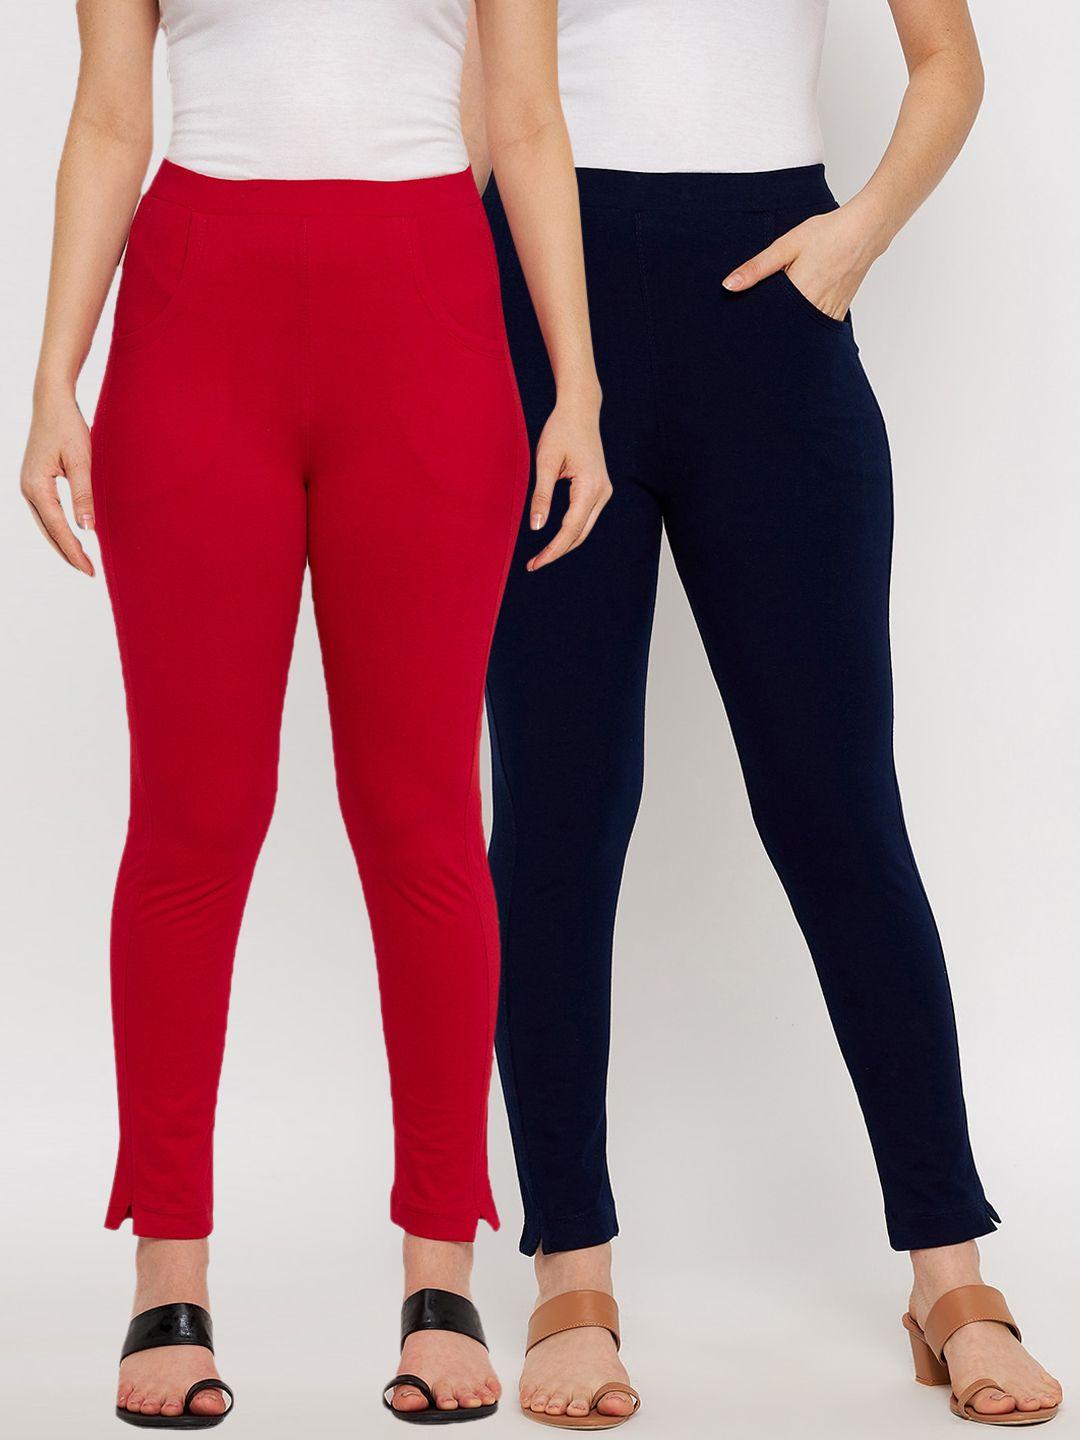 clora-creation-women-pack-of-2-solid-red-and-navy-blue-ankle-length-leggings